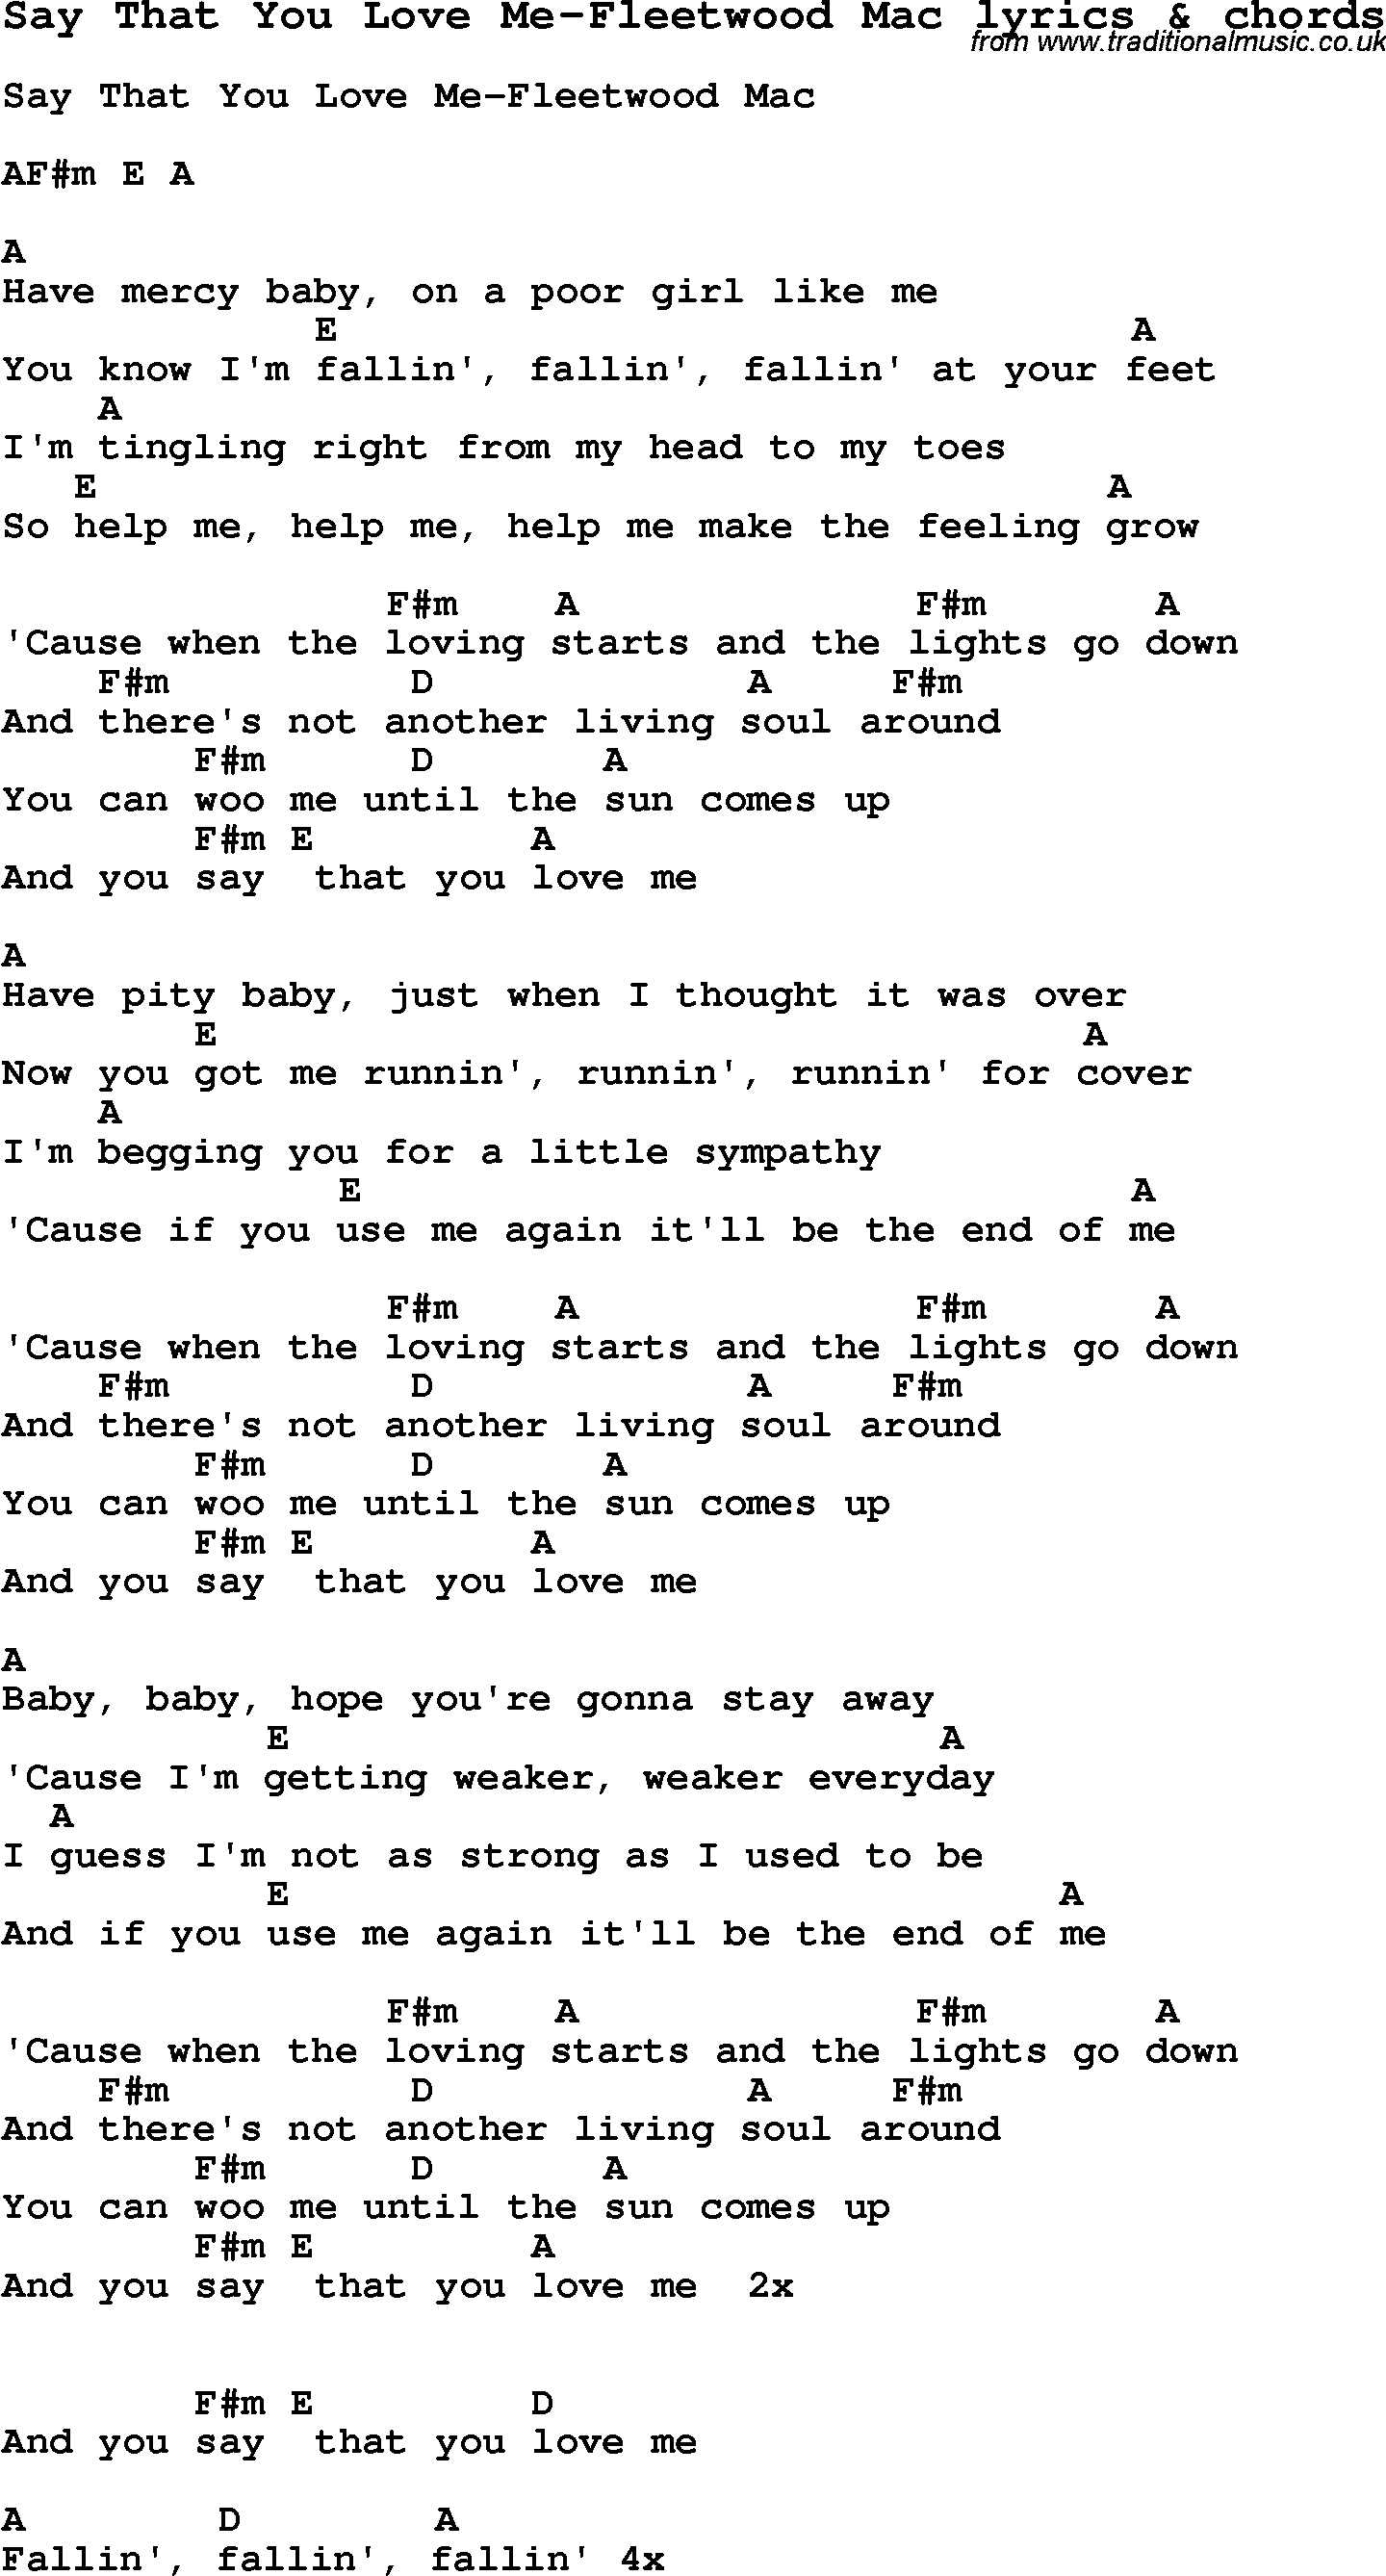 Love Song Lyrics for: Say That You Love Me-Fleetwood Mac with chords for Ukulele, Guitar Banjo etc.